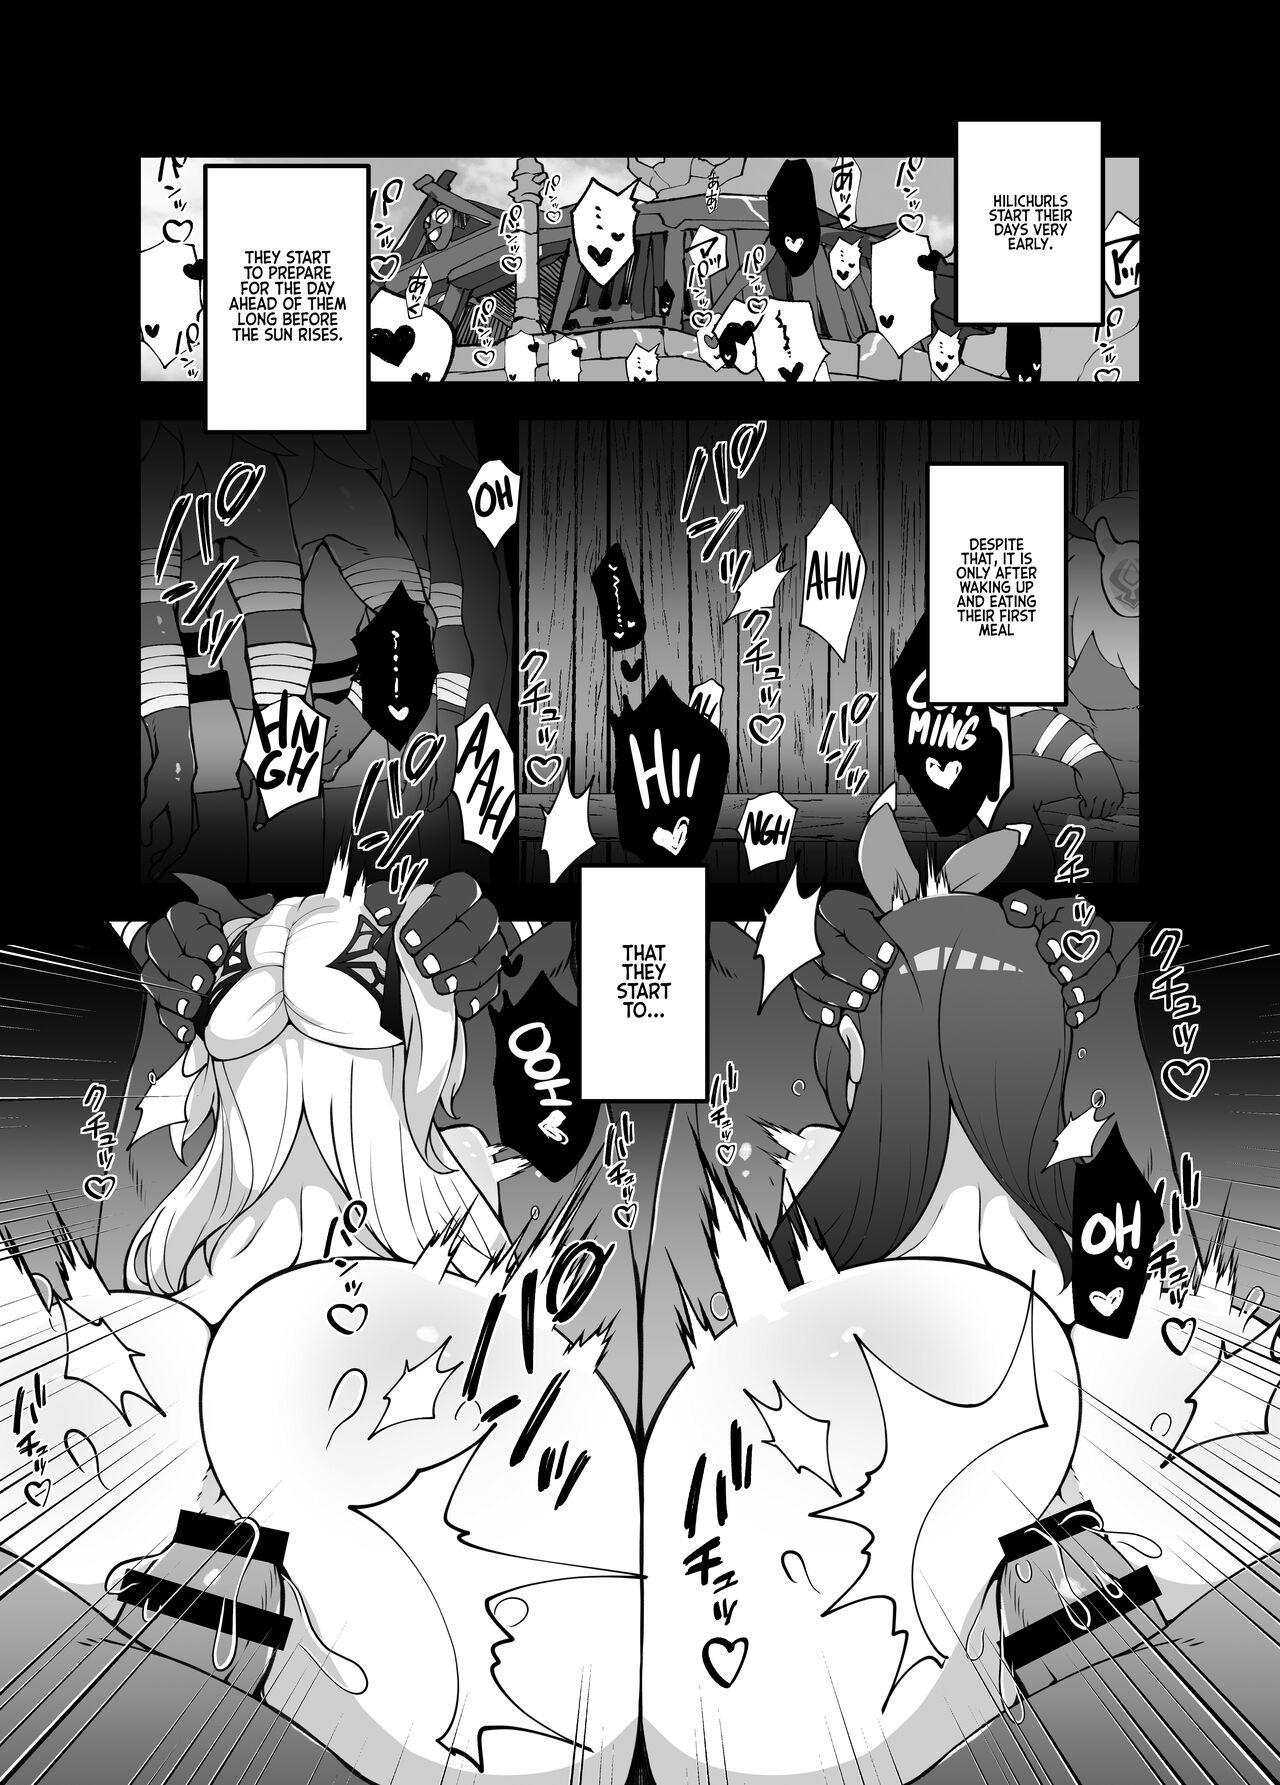 Menage [Karouke (Karou)] The Attack of the Hilichurls II ~The Invasion's Prelude~ Noelle,Chivalric Blossom that withered~ (Genshin Impact) [English] [Kyuume] [Digital] - Genshin impact Free Blow Job - Page 3